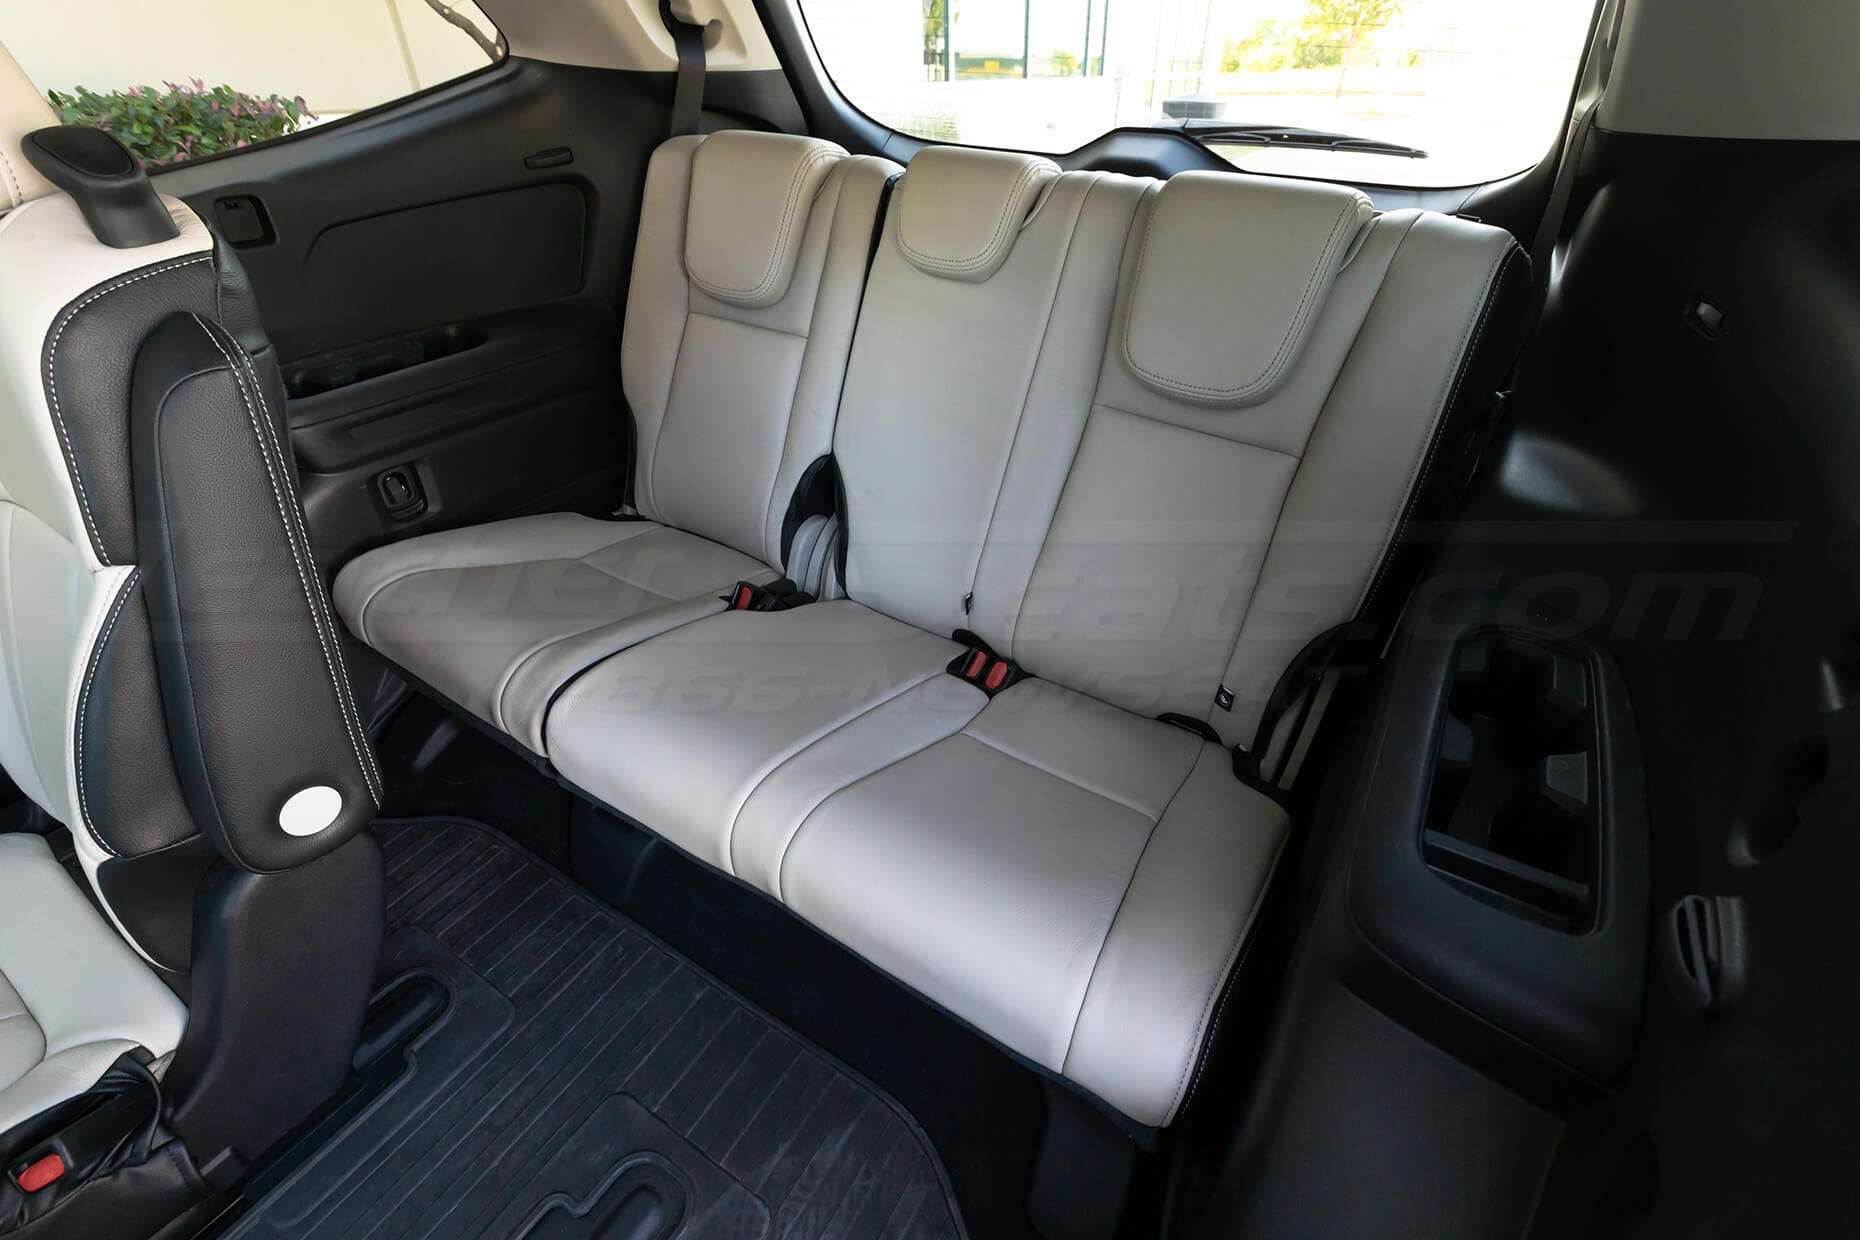 Two-Tone Subaru Ascent leather seats - Black w/ Dune Facings - 3rd row interior from driver's side